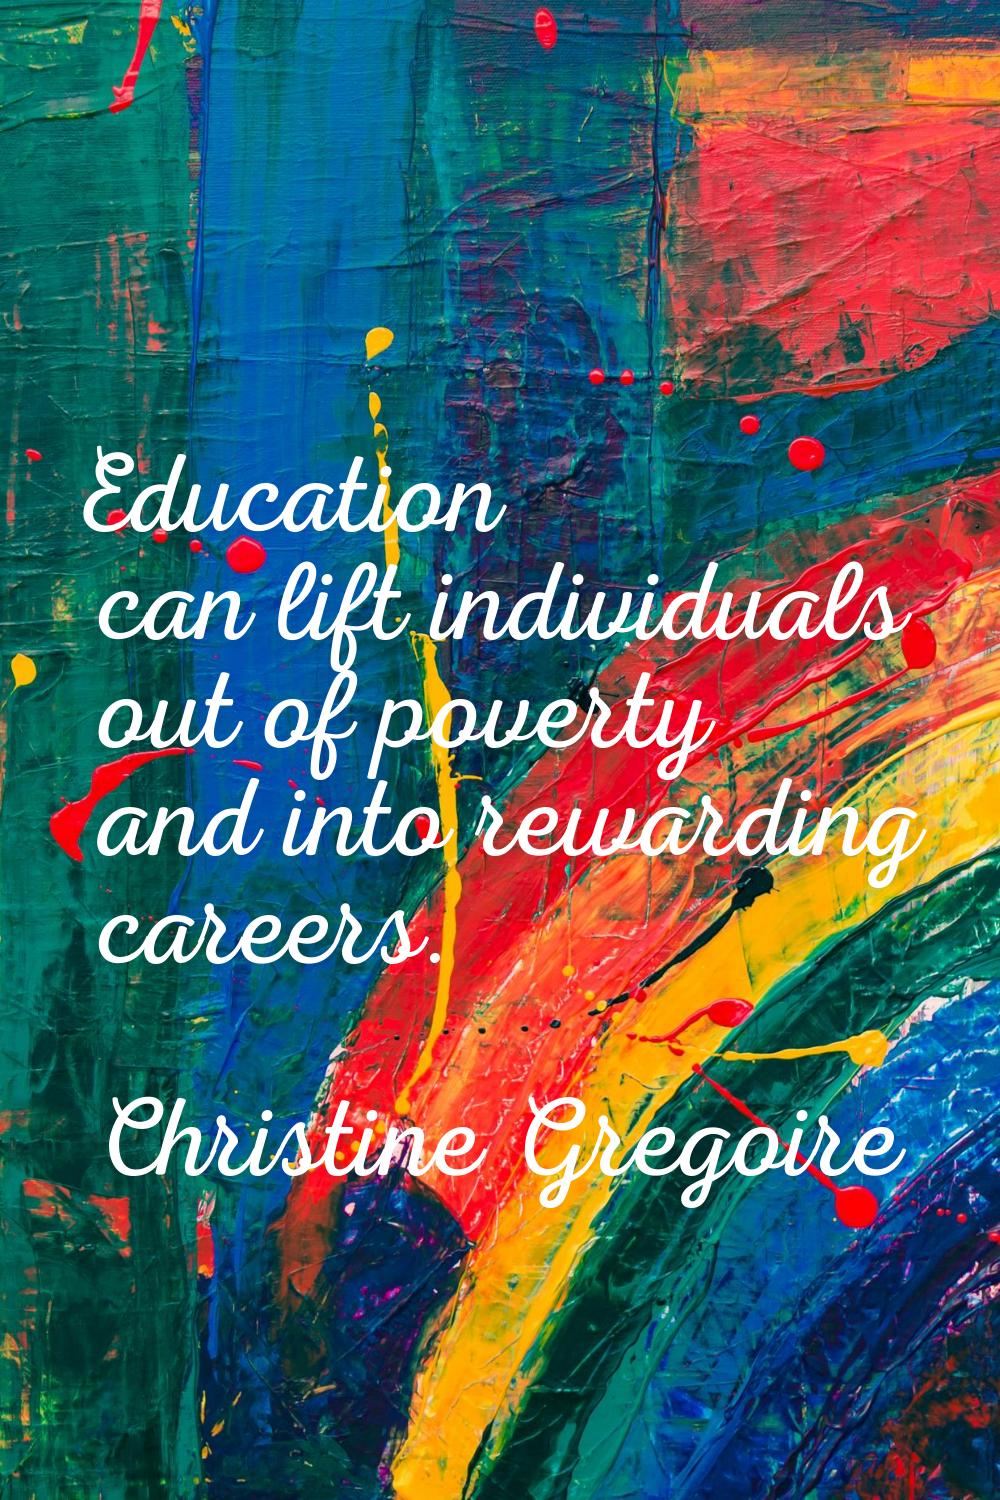 Education can lift individuals out of poverty and into rewarding careers.